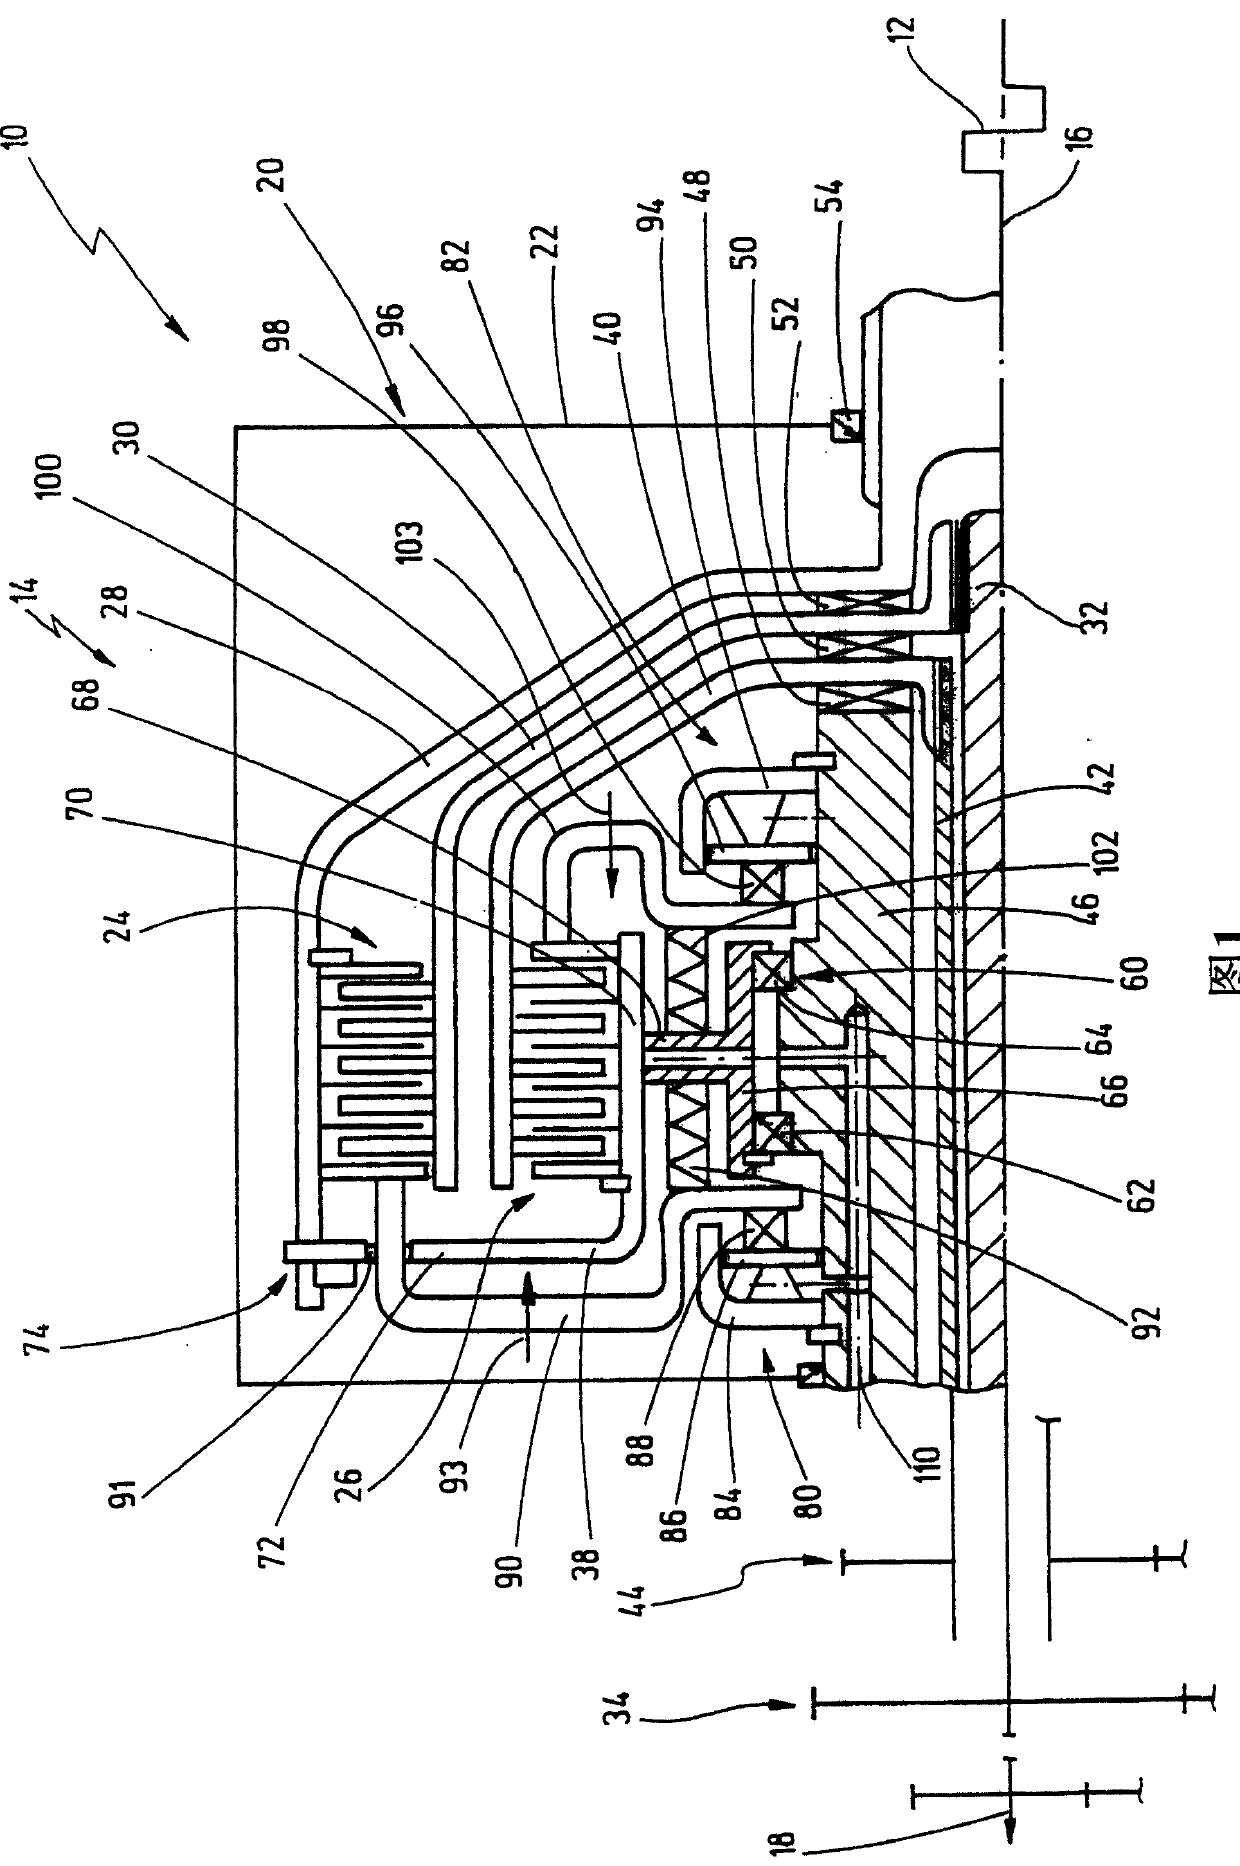 Double-clutch device used for double-clutch transmission